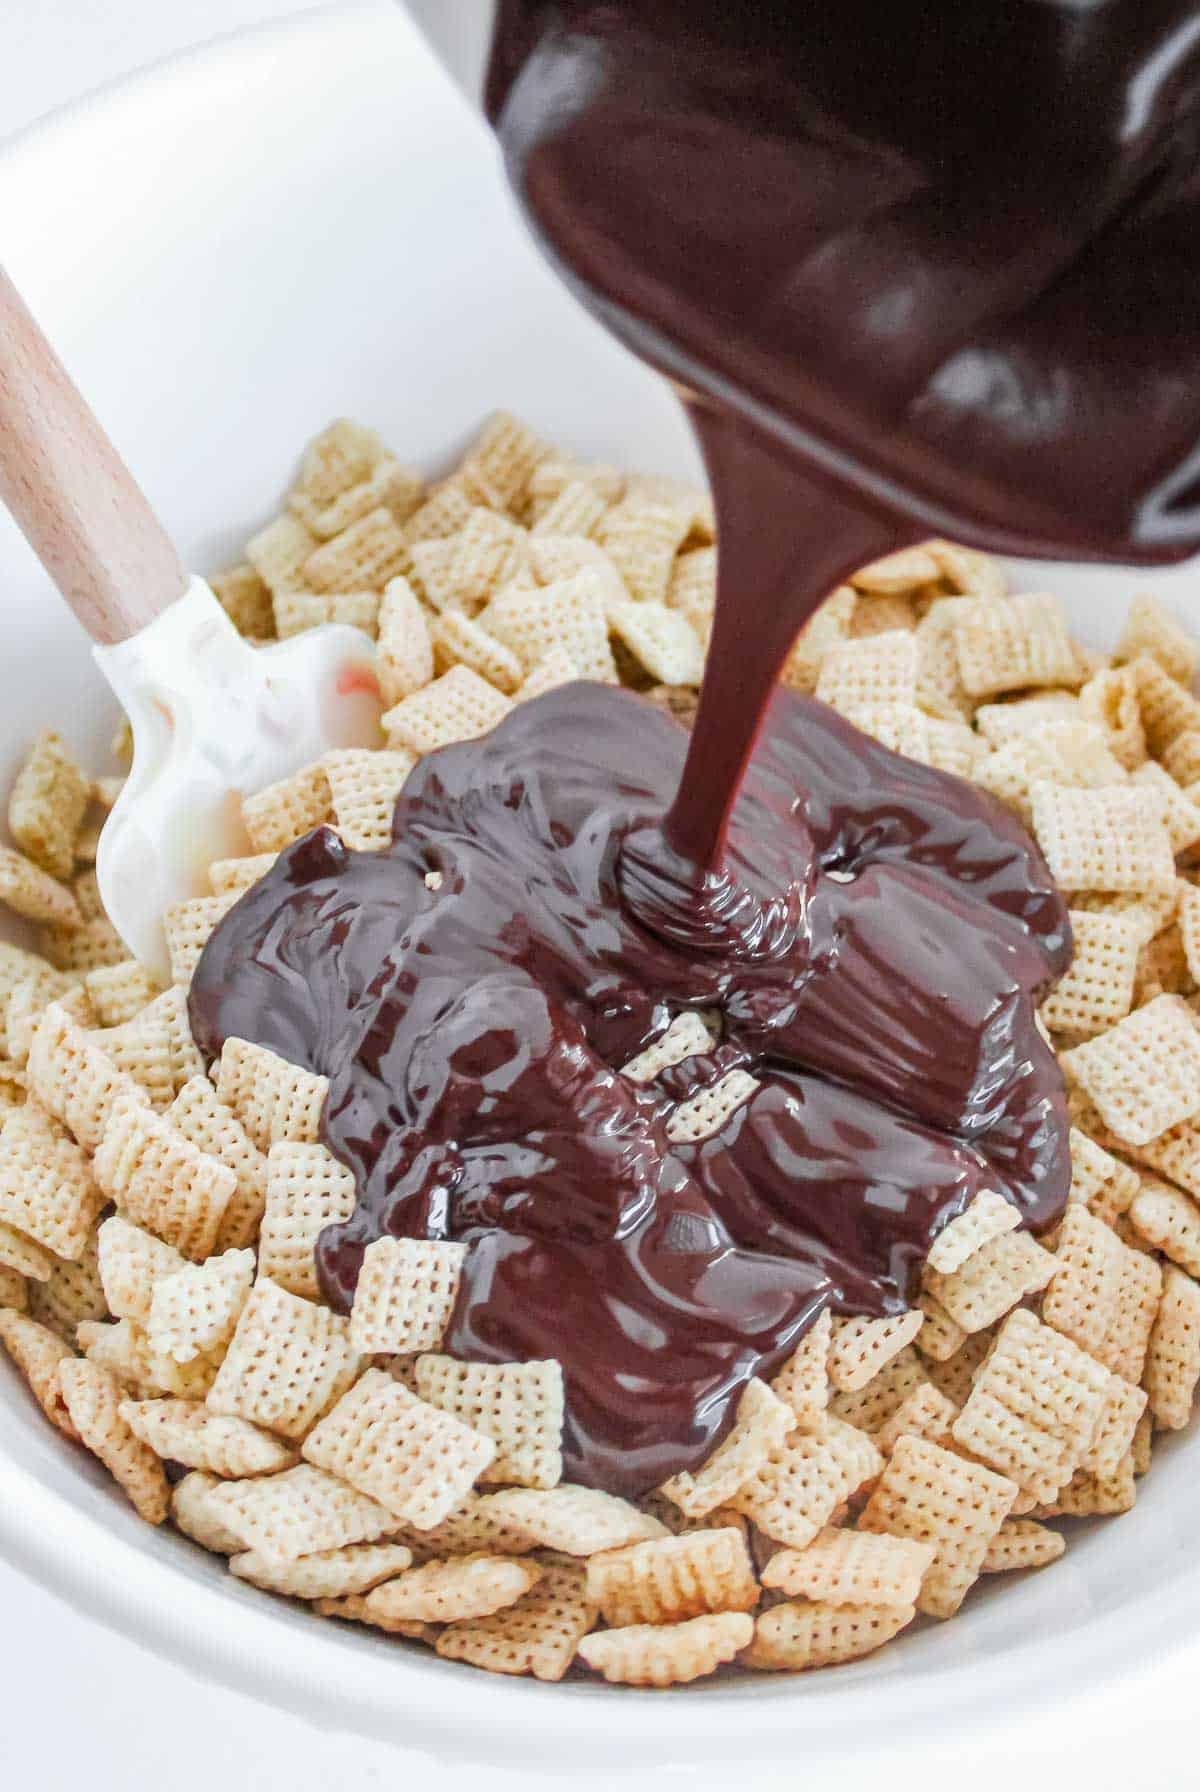 A person pouring melted chocolate over a bowl of Chex cereal.